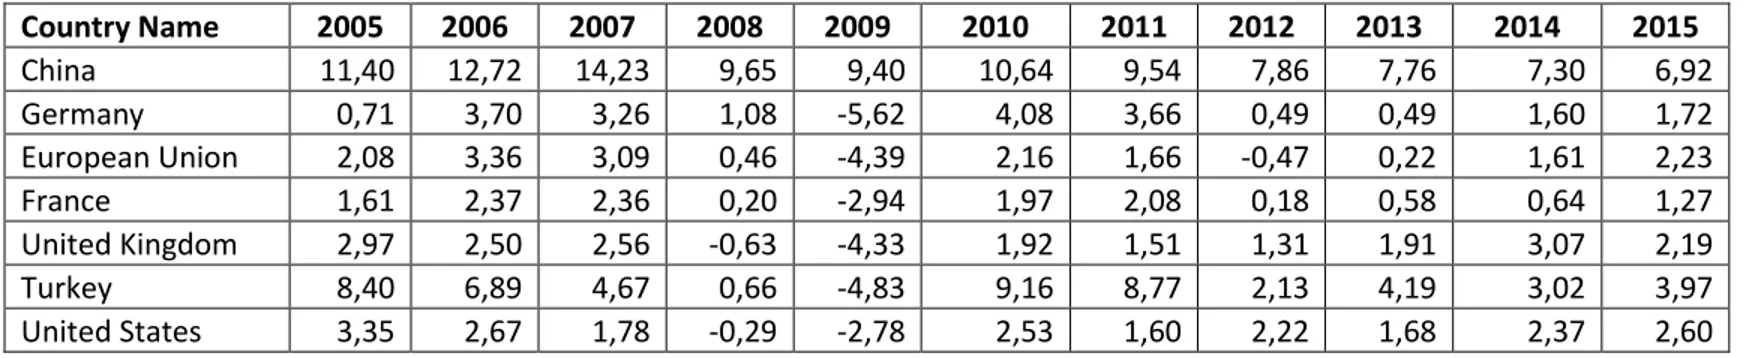 Table 1 Annual GDP Growth Rates of the Selected Countries (%) 